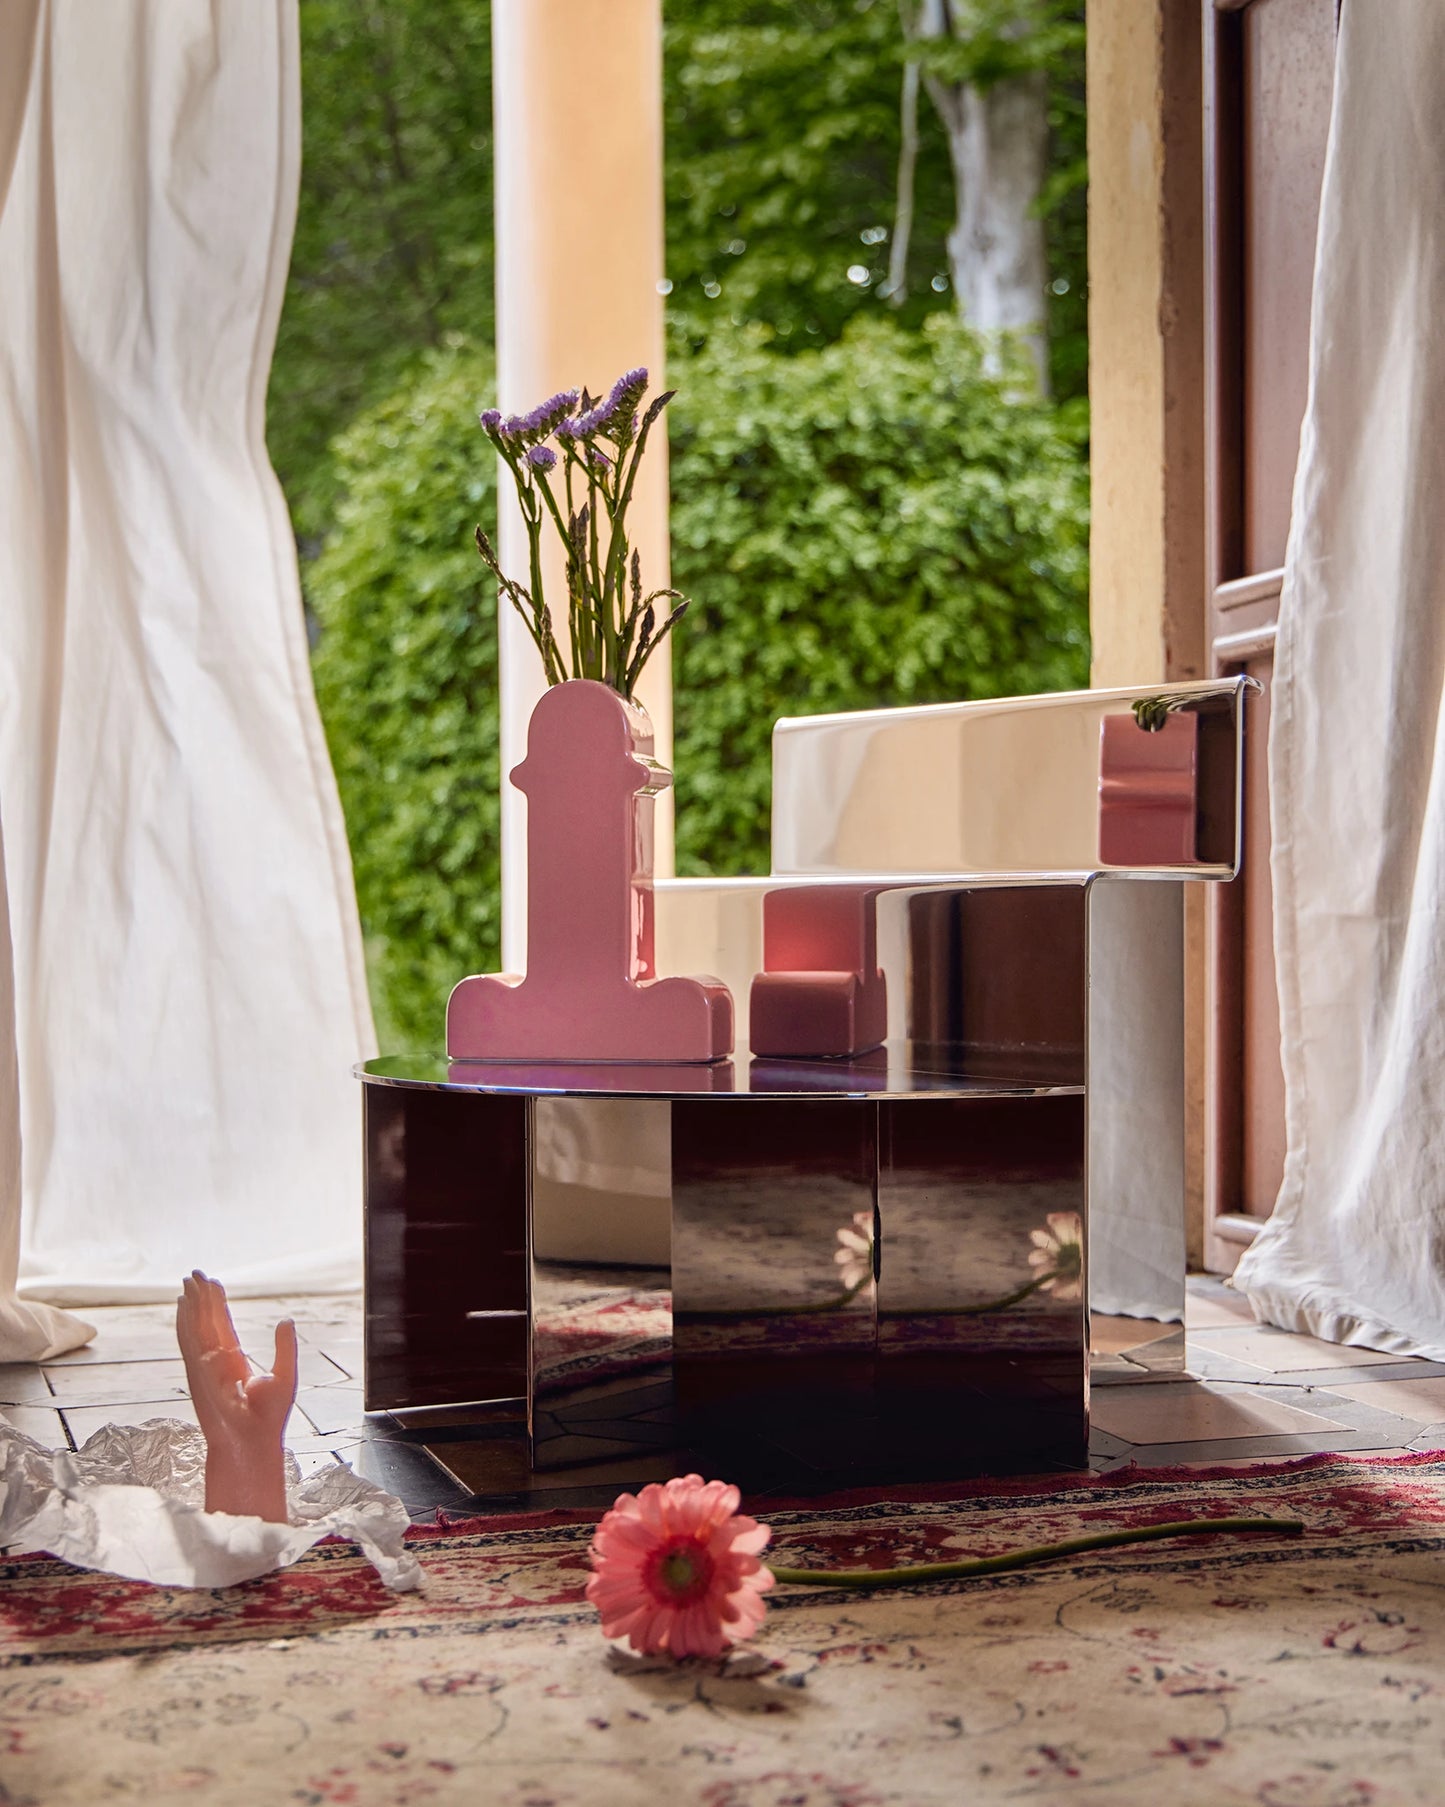 stainless-steel mirror chair with mesoamerican temple-like shape, in a domestic environment with white curtains, pink props and persian carpet